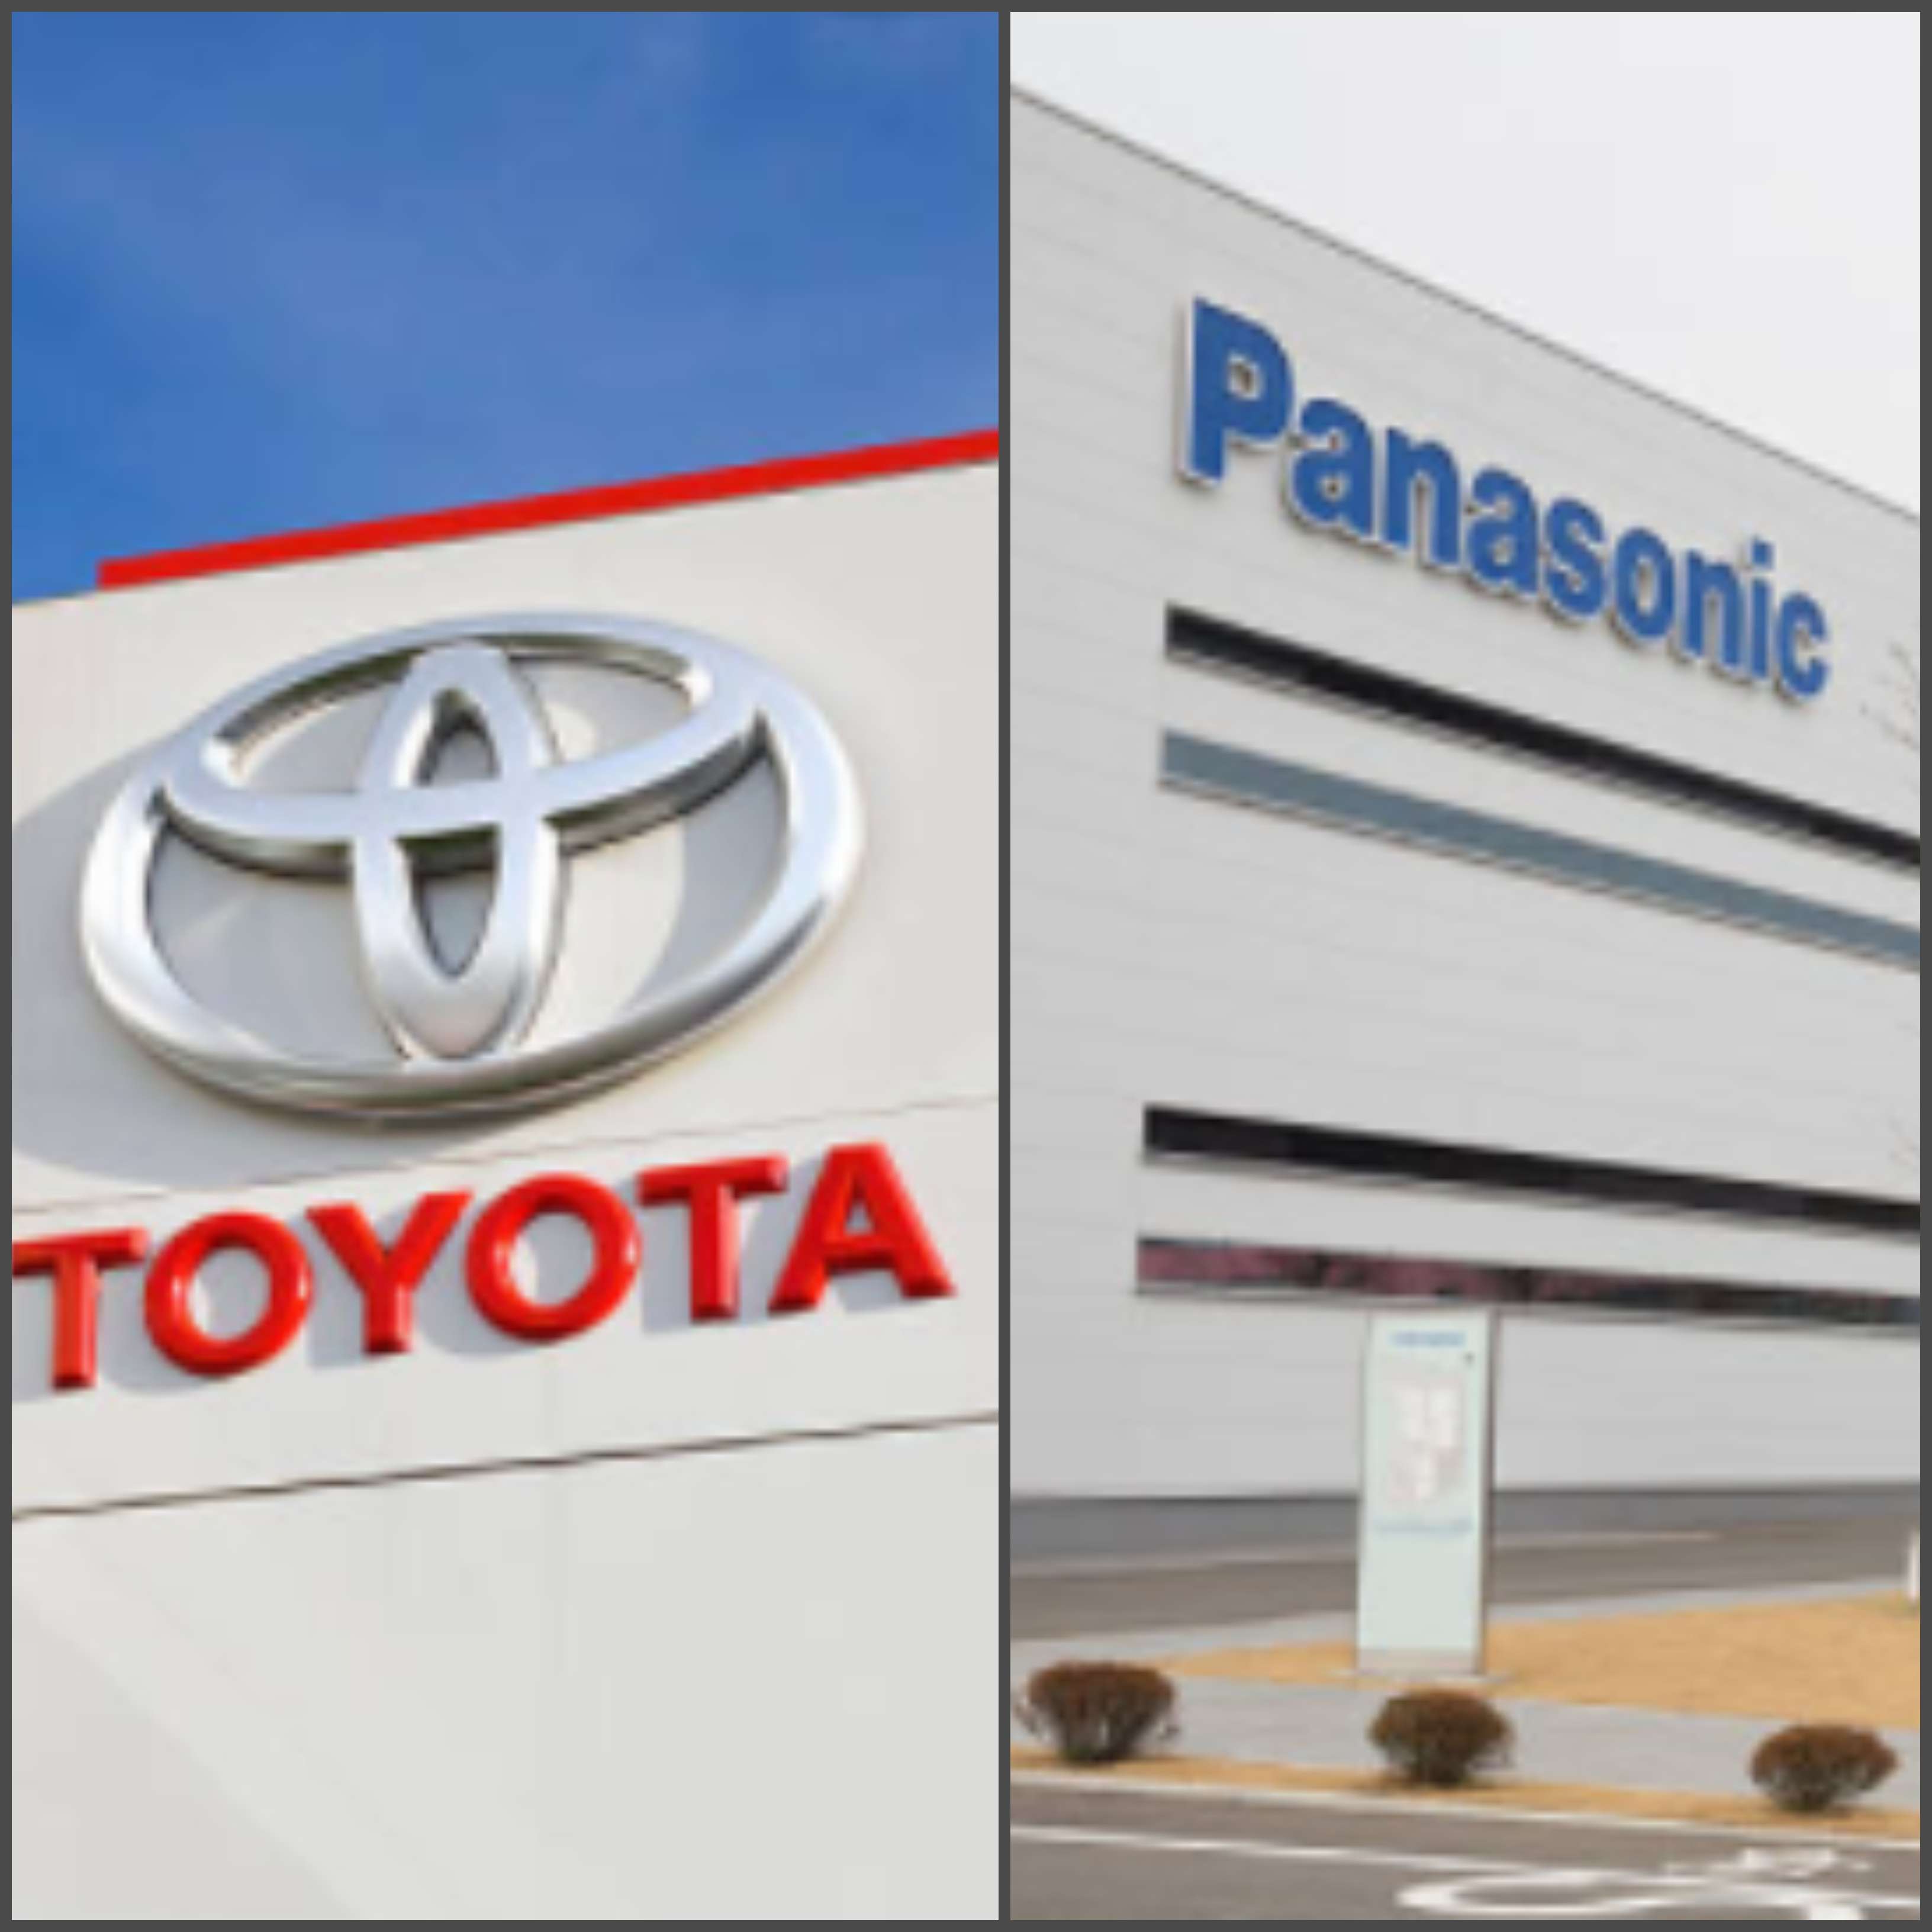 Toyota Panasonic Battery Jv To Boost Efficiency To Catch Up With Chinese Rivals Auto News Et Auto